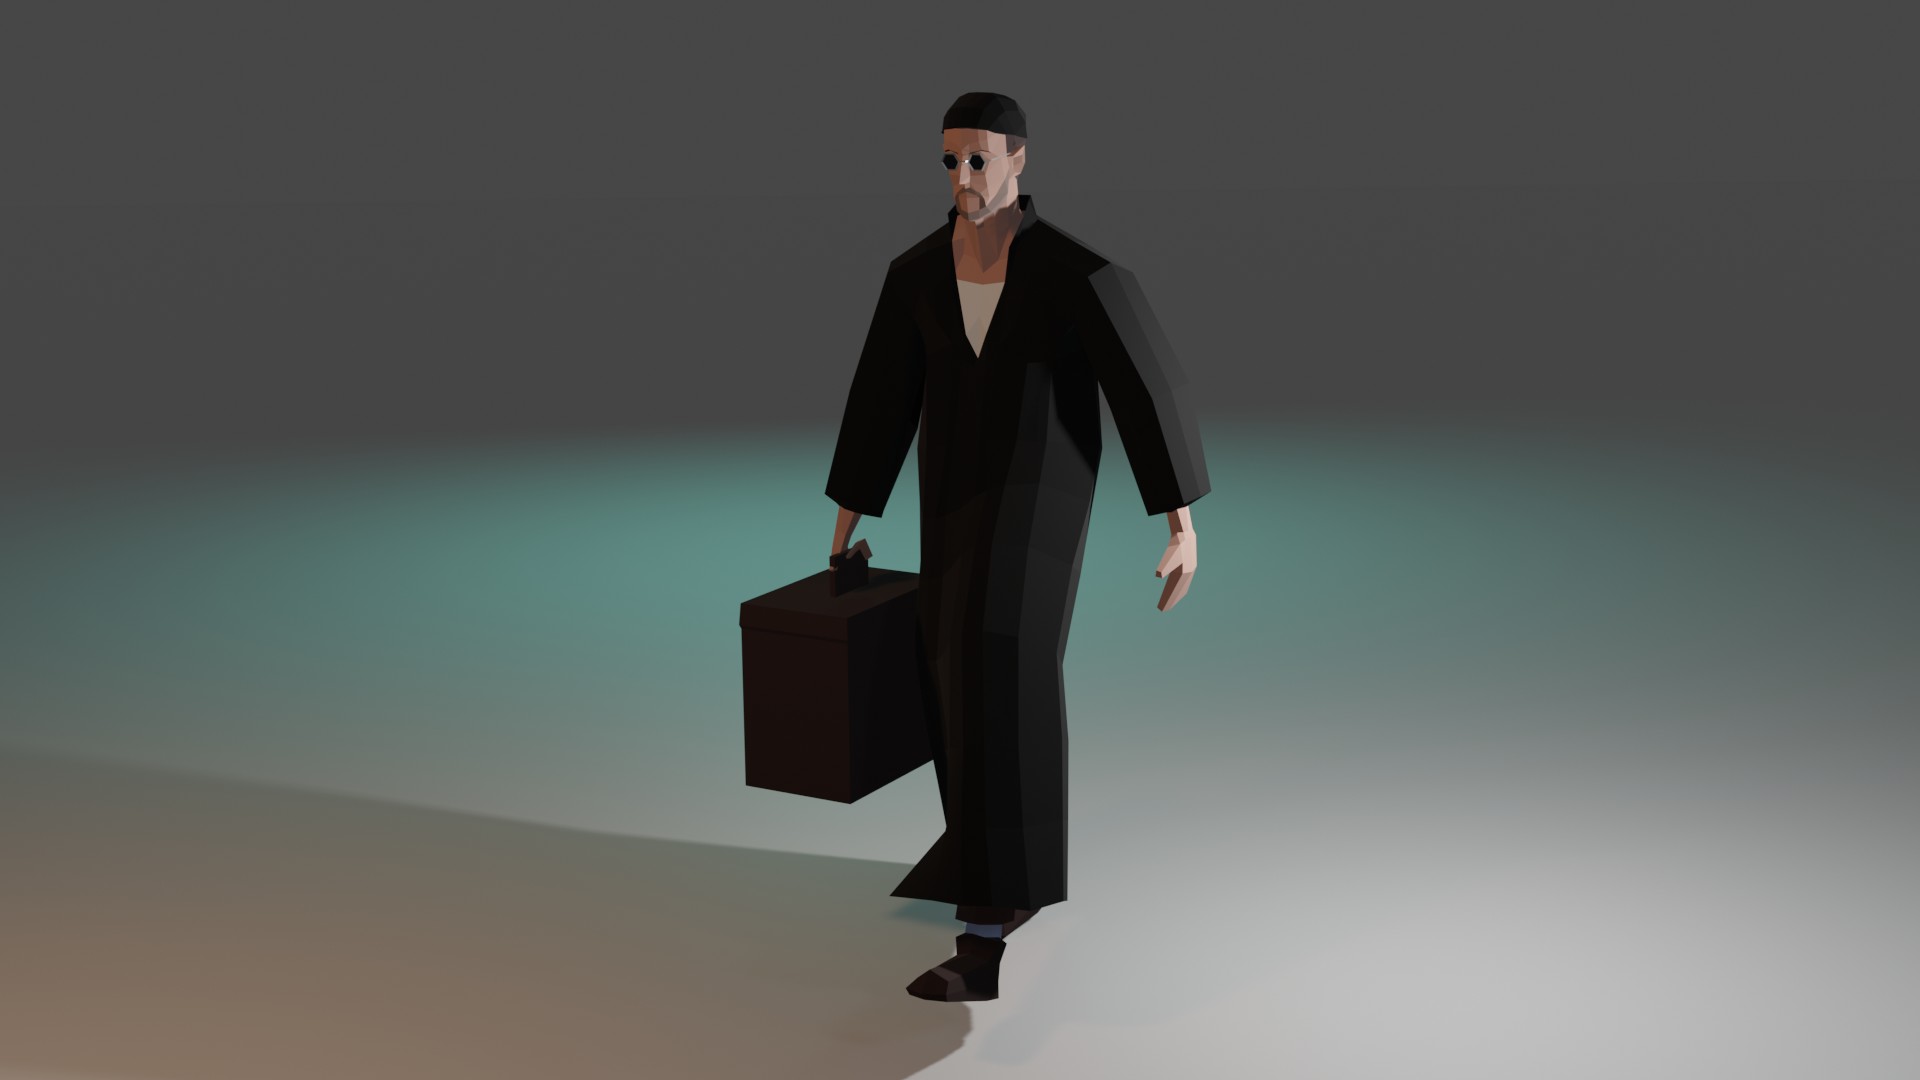 Low Poly 3D Characters